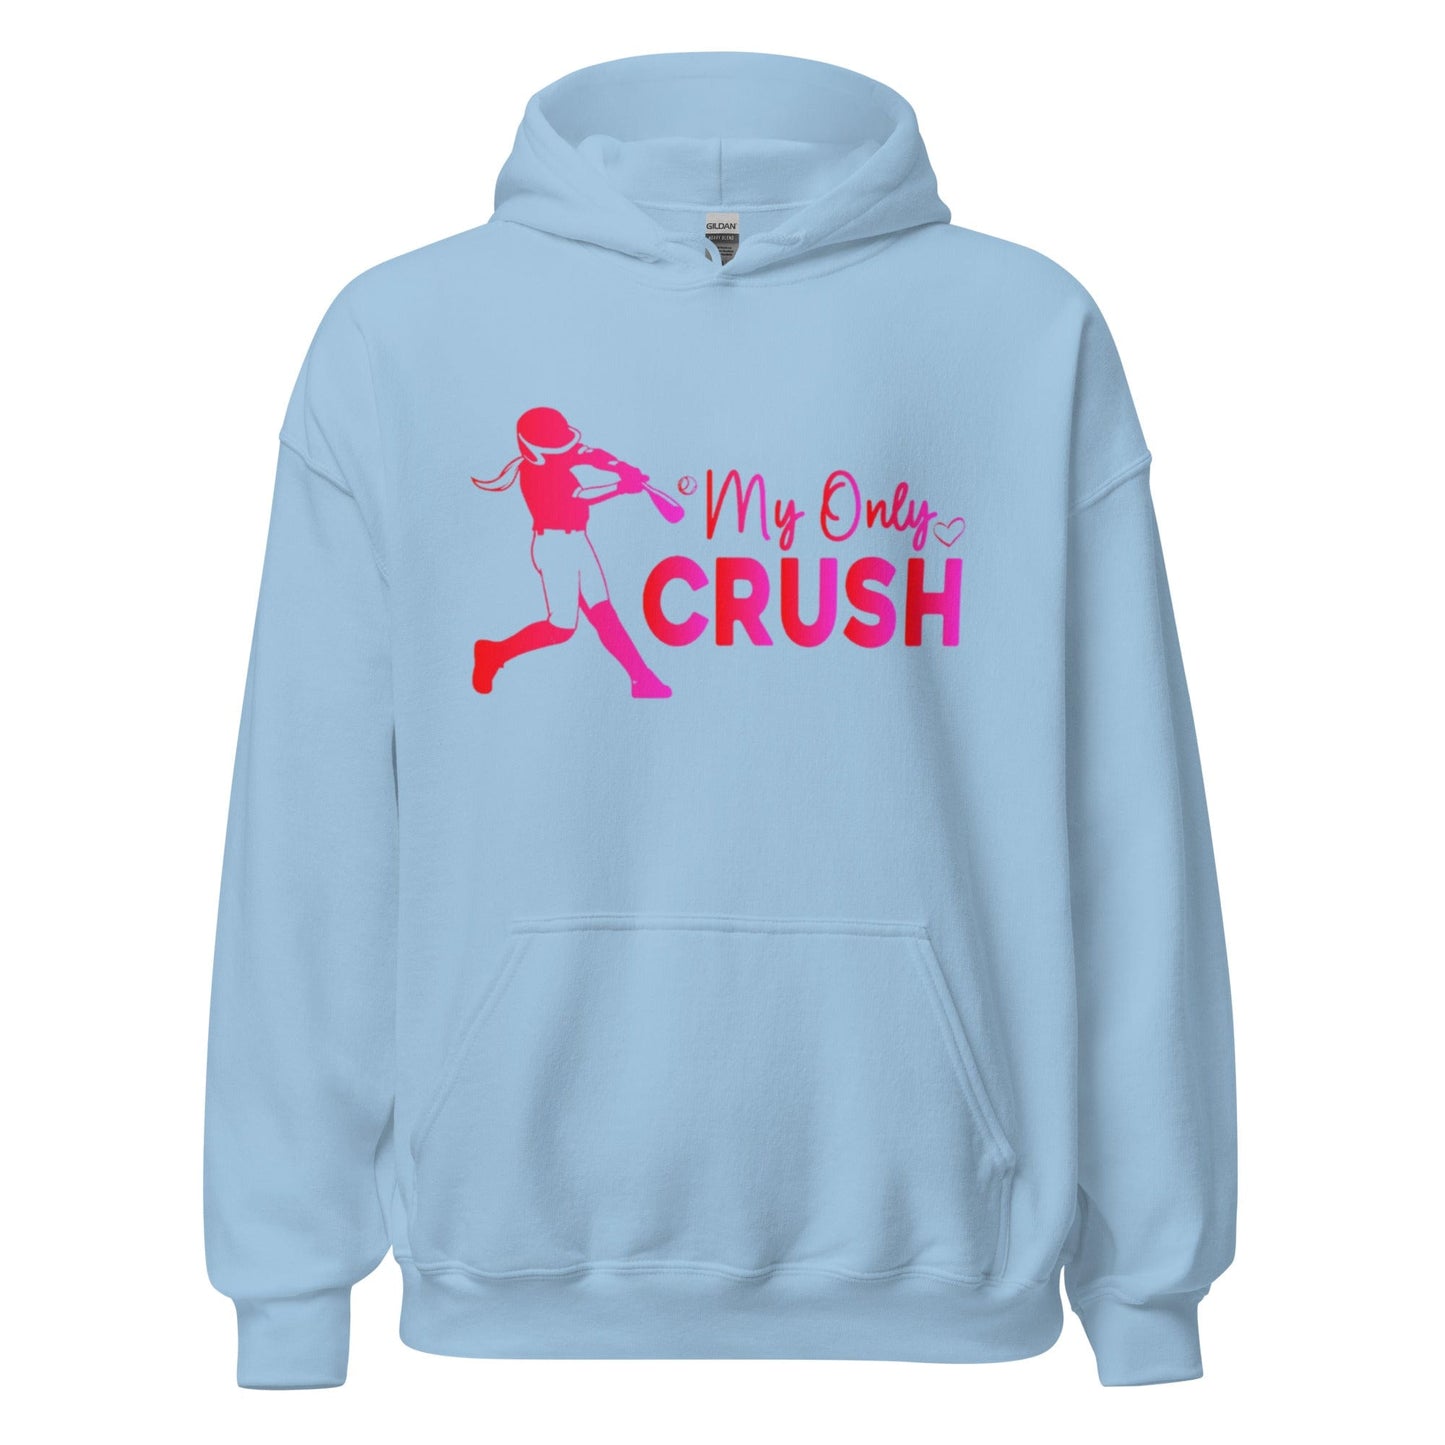 My Only Crush - Adult Hoodie